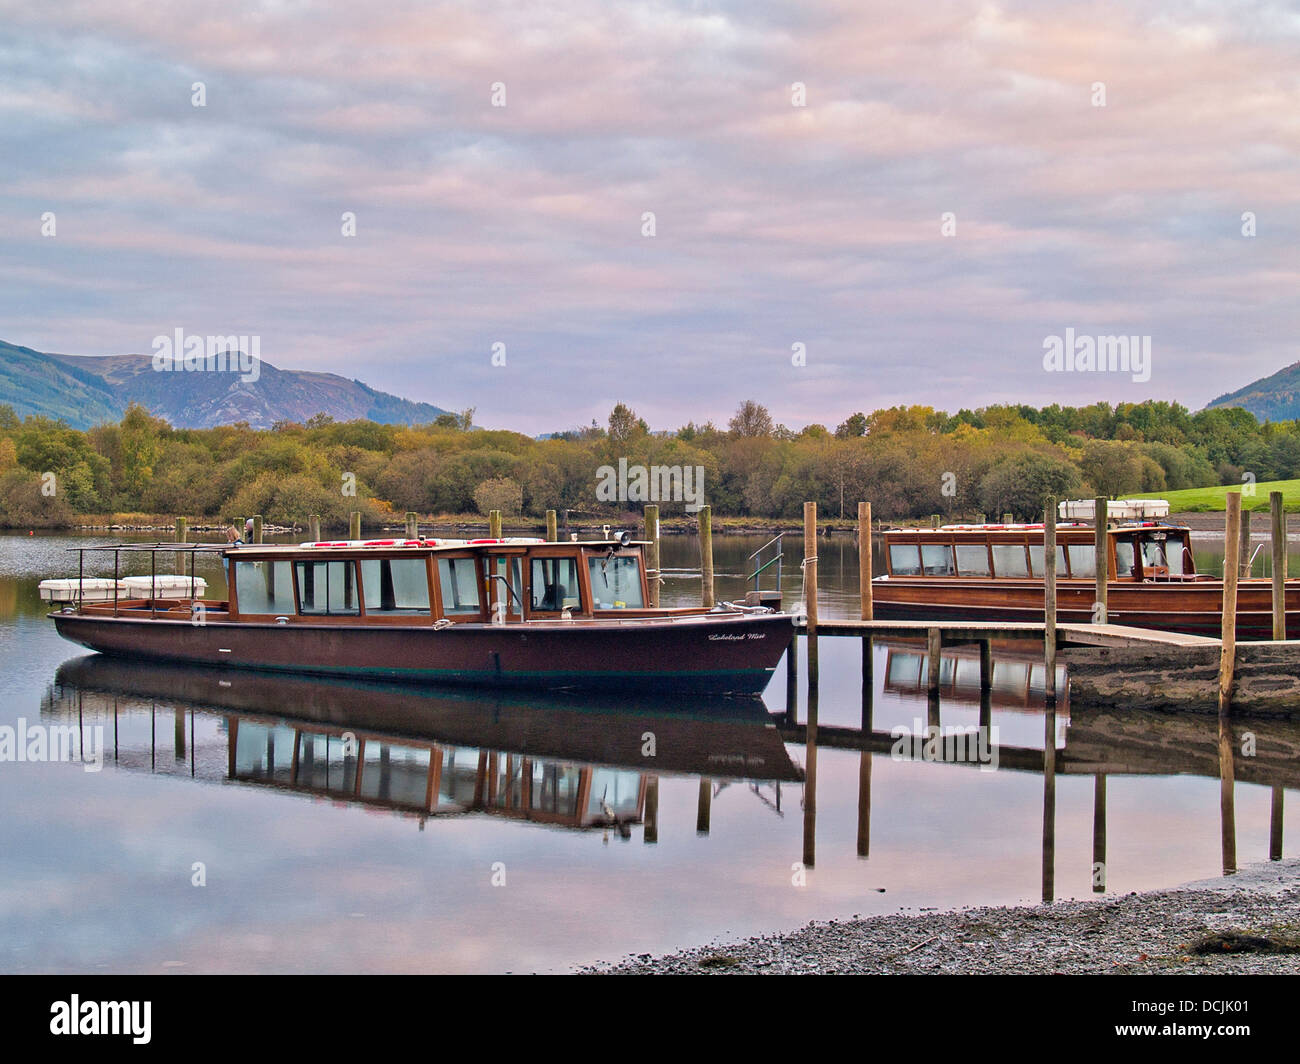 Motor boats in early morning light, Derwentwater, Cumbria, UK Stock Photo